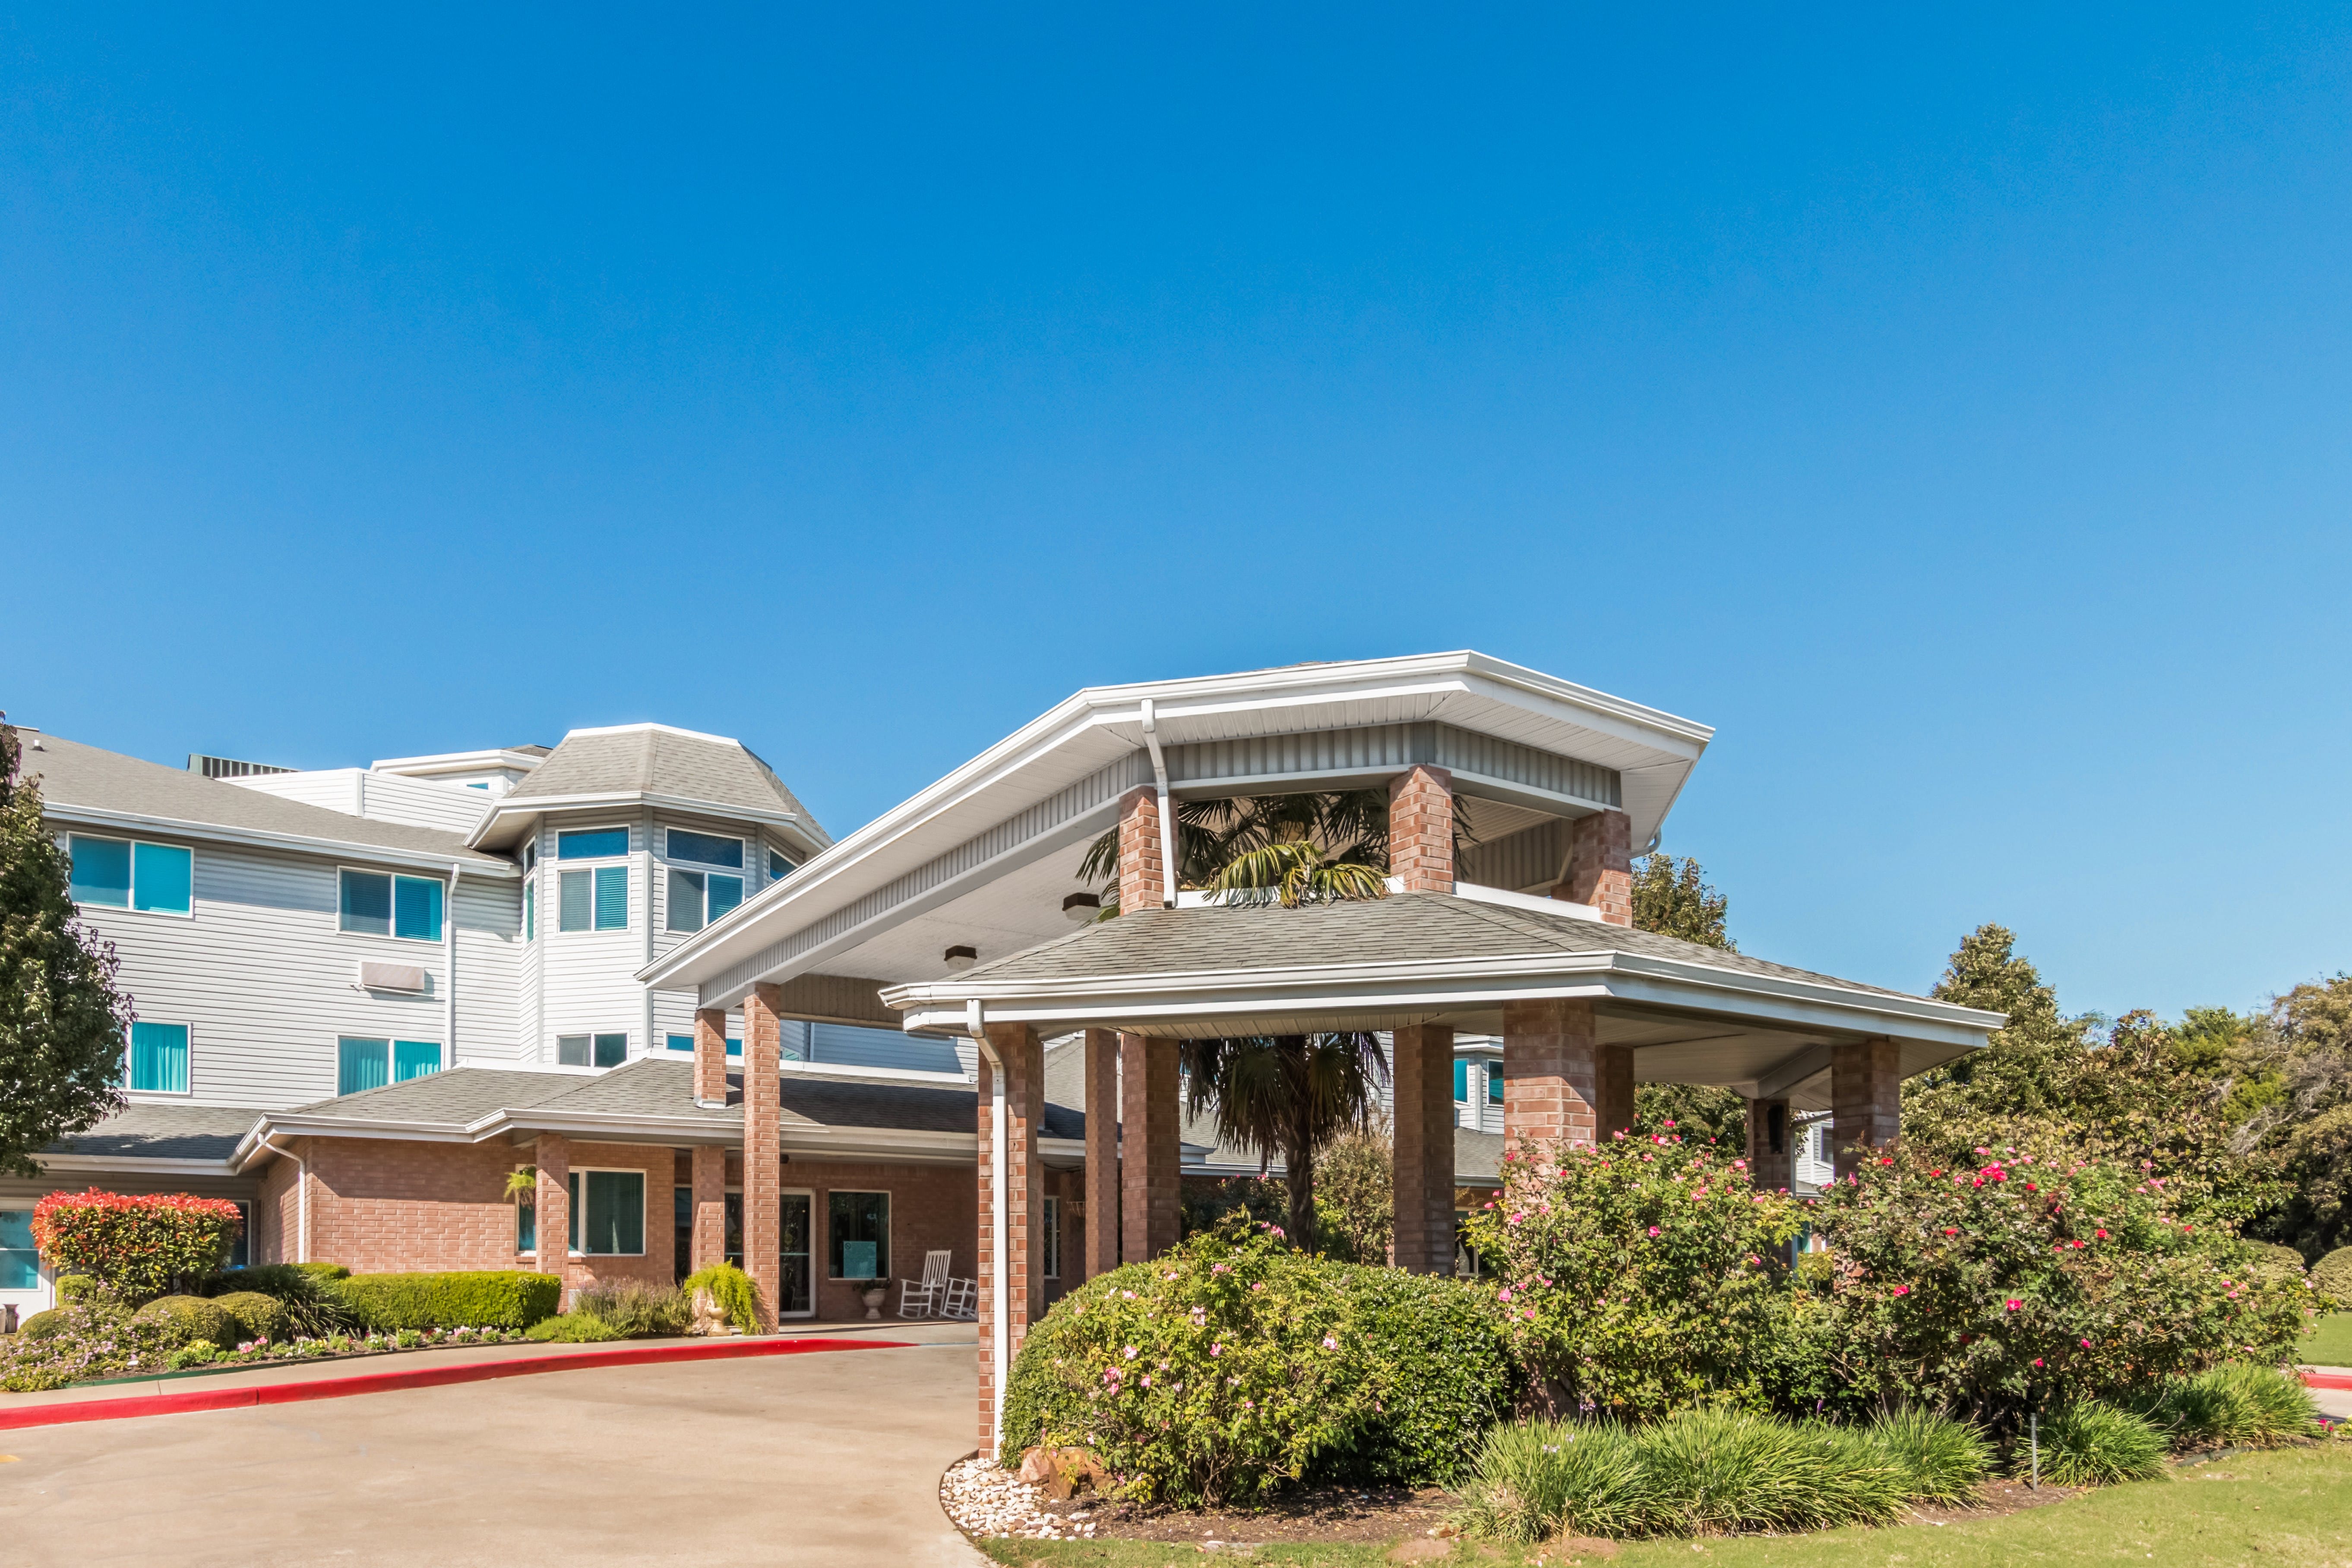 Asher Point Independent Living of Waco